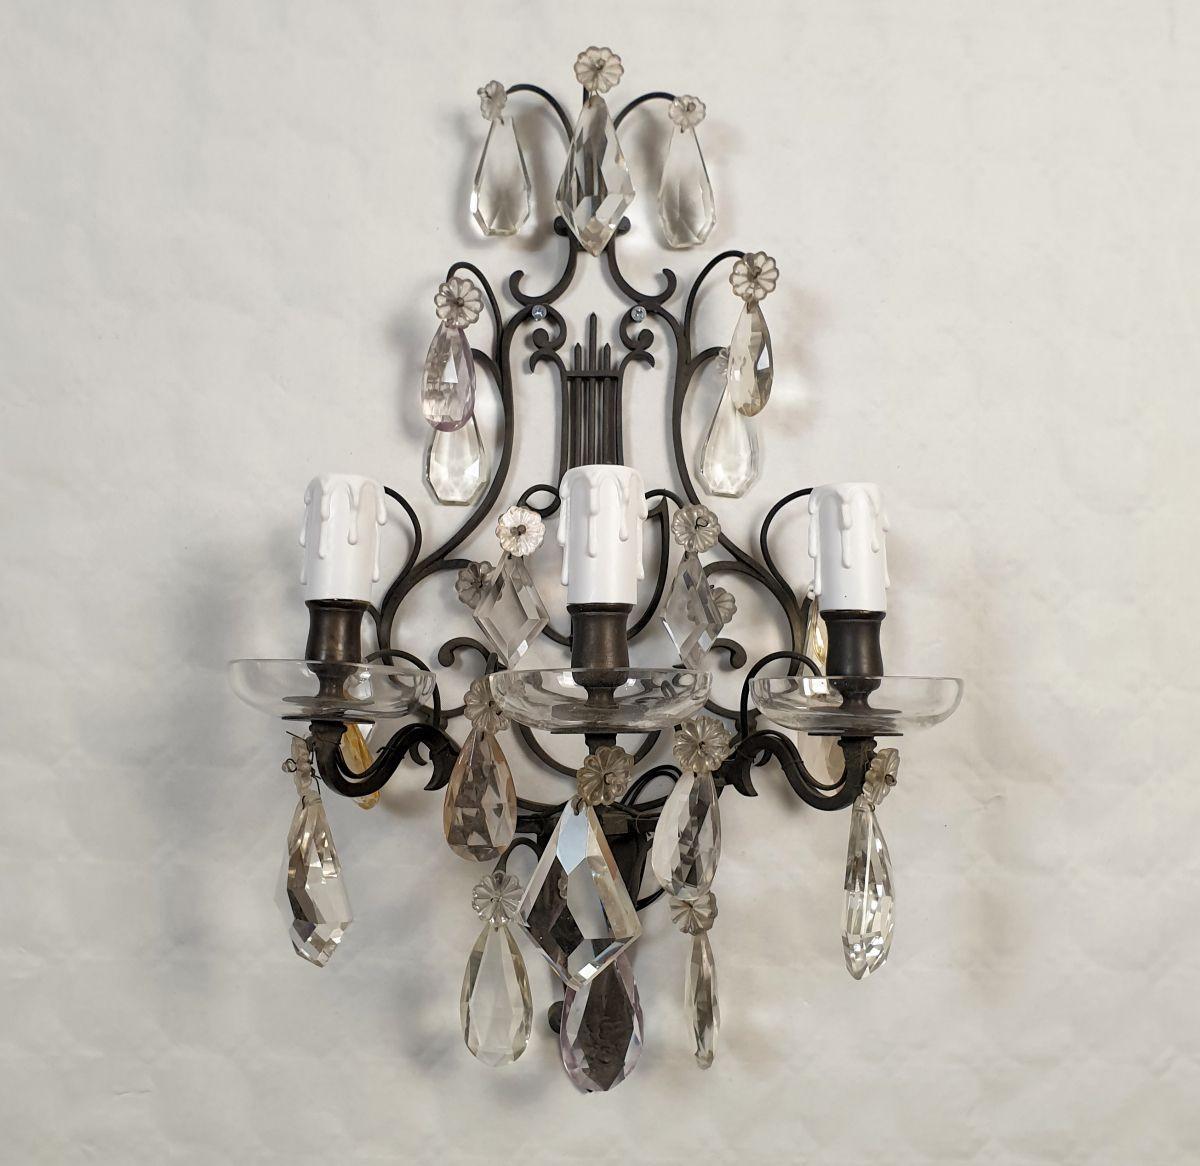 Pair of crystals wall sconces, France circa 1900s.
The French sconces have a bronze frame with a Lyre shape.
The antique sconces are fully ornate with crystals: a few of them in pastel soft colors.
Each sconce has 3 lights and is rewired.
Very good